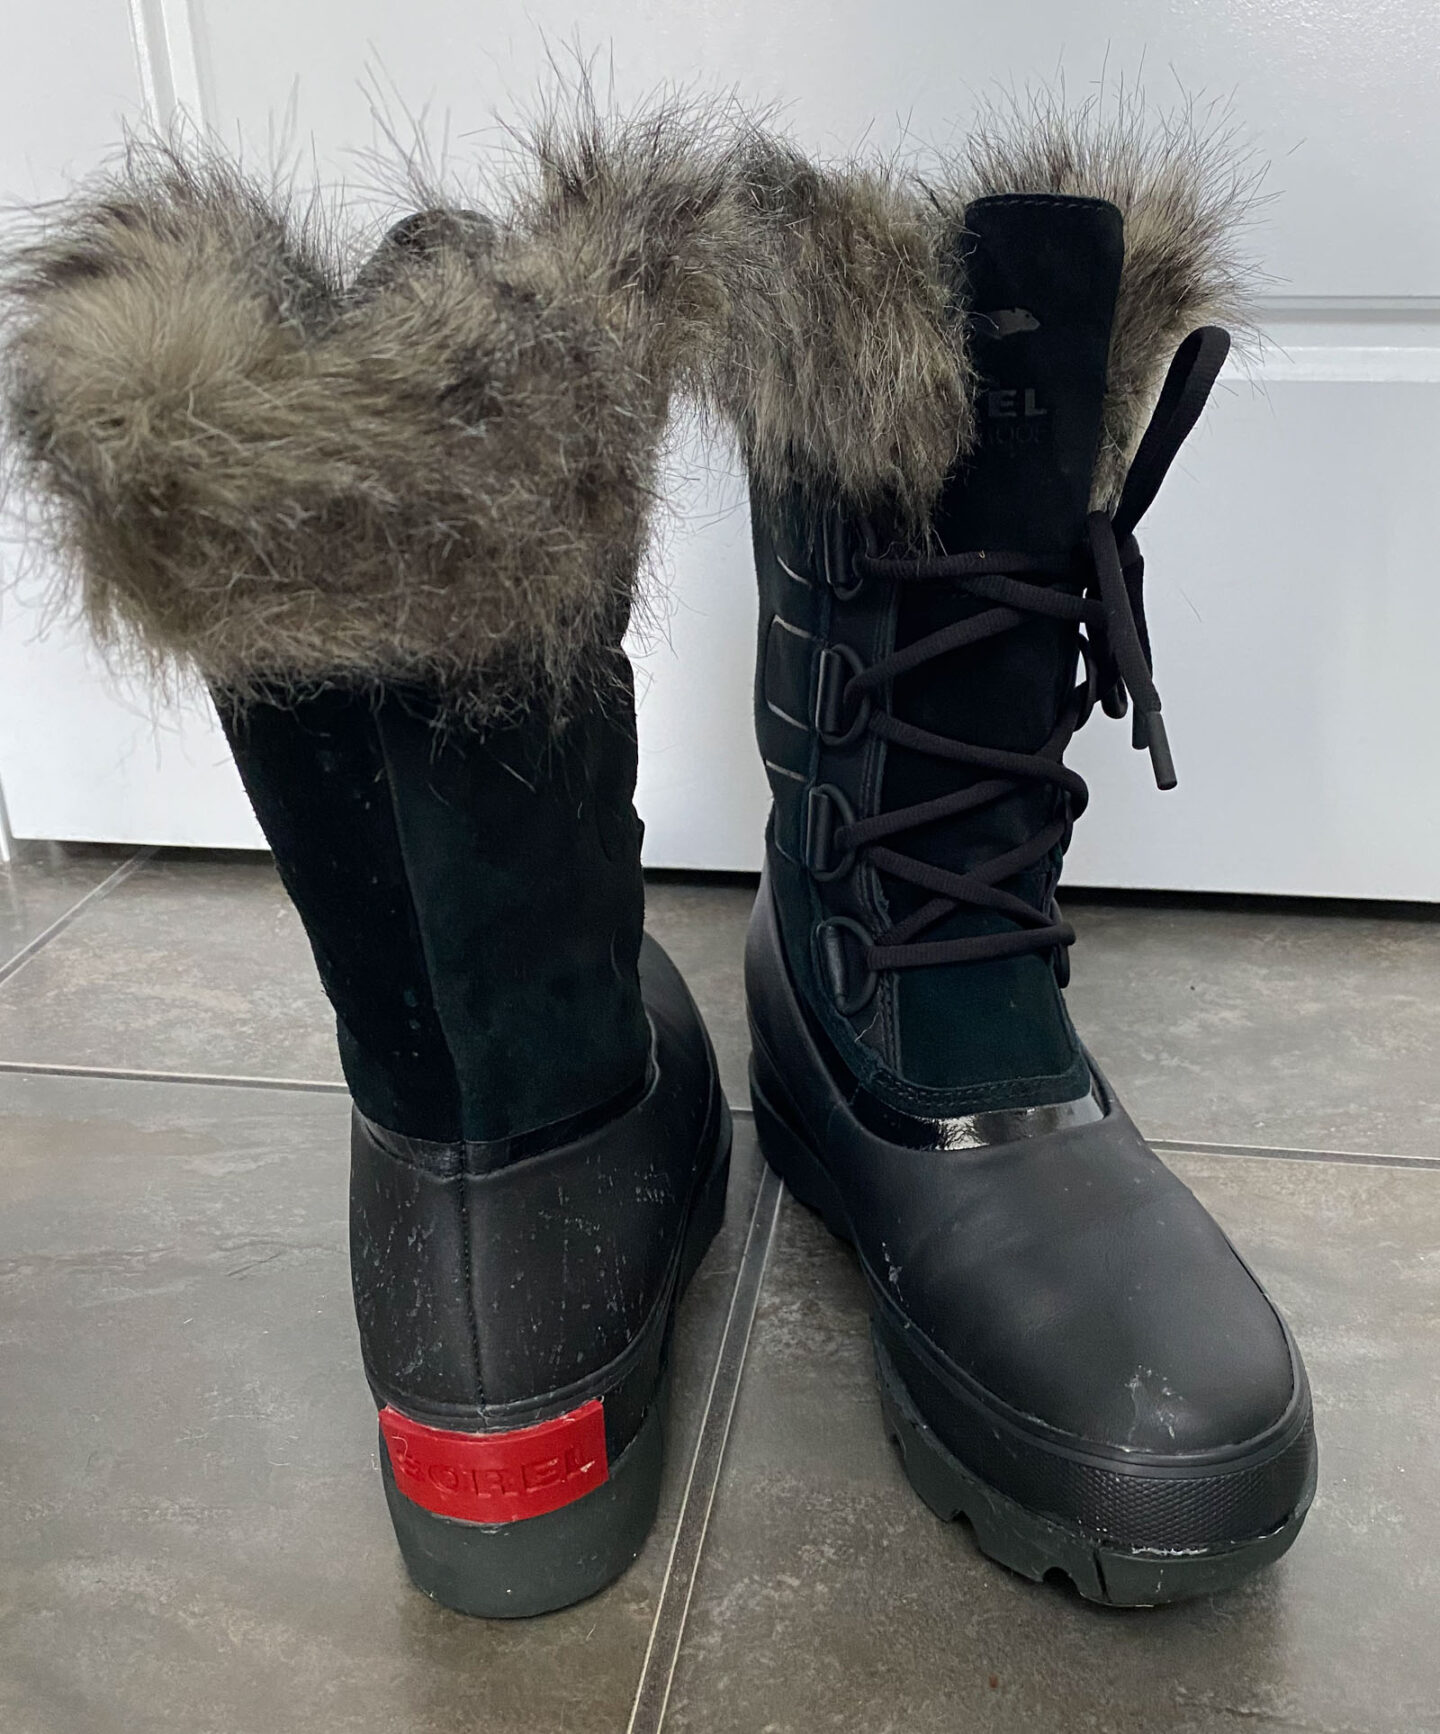 sorel joan of arctic boot front and back